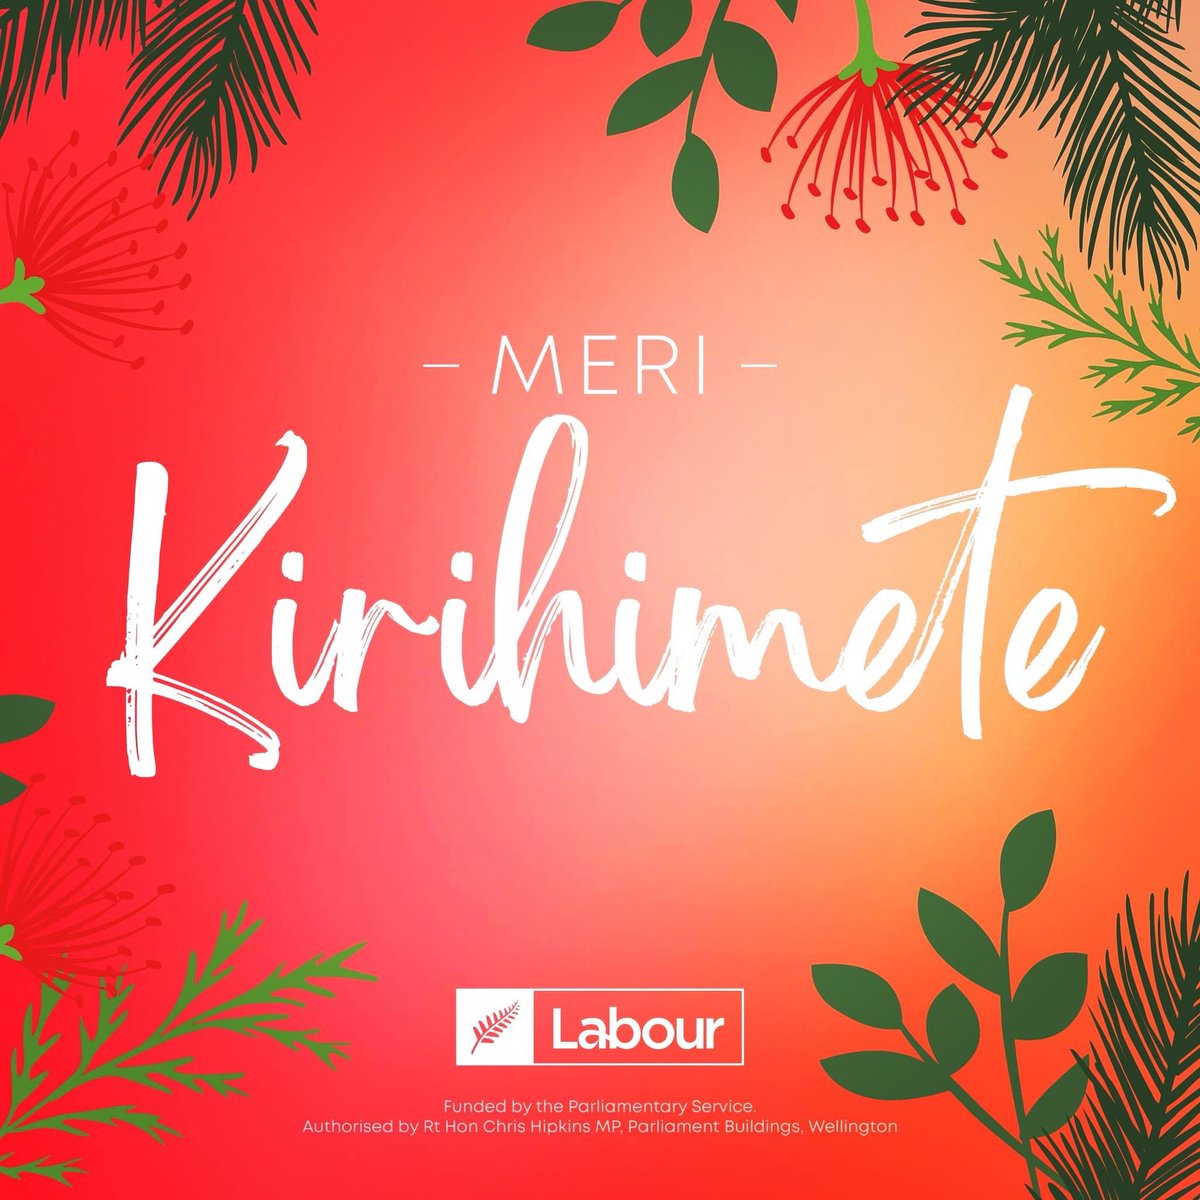 We mihi to everyone in our communities enjoying making today happen for our #whānau - esp our kids & #kaumātua - ensuring no one feels alone on Christmas Day. #ReconnectWithWhānau #RechargeWithFriends #KiaKahaTeReoMāori ❤️ #nzpol